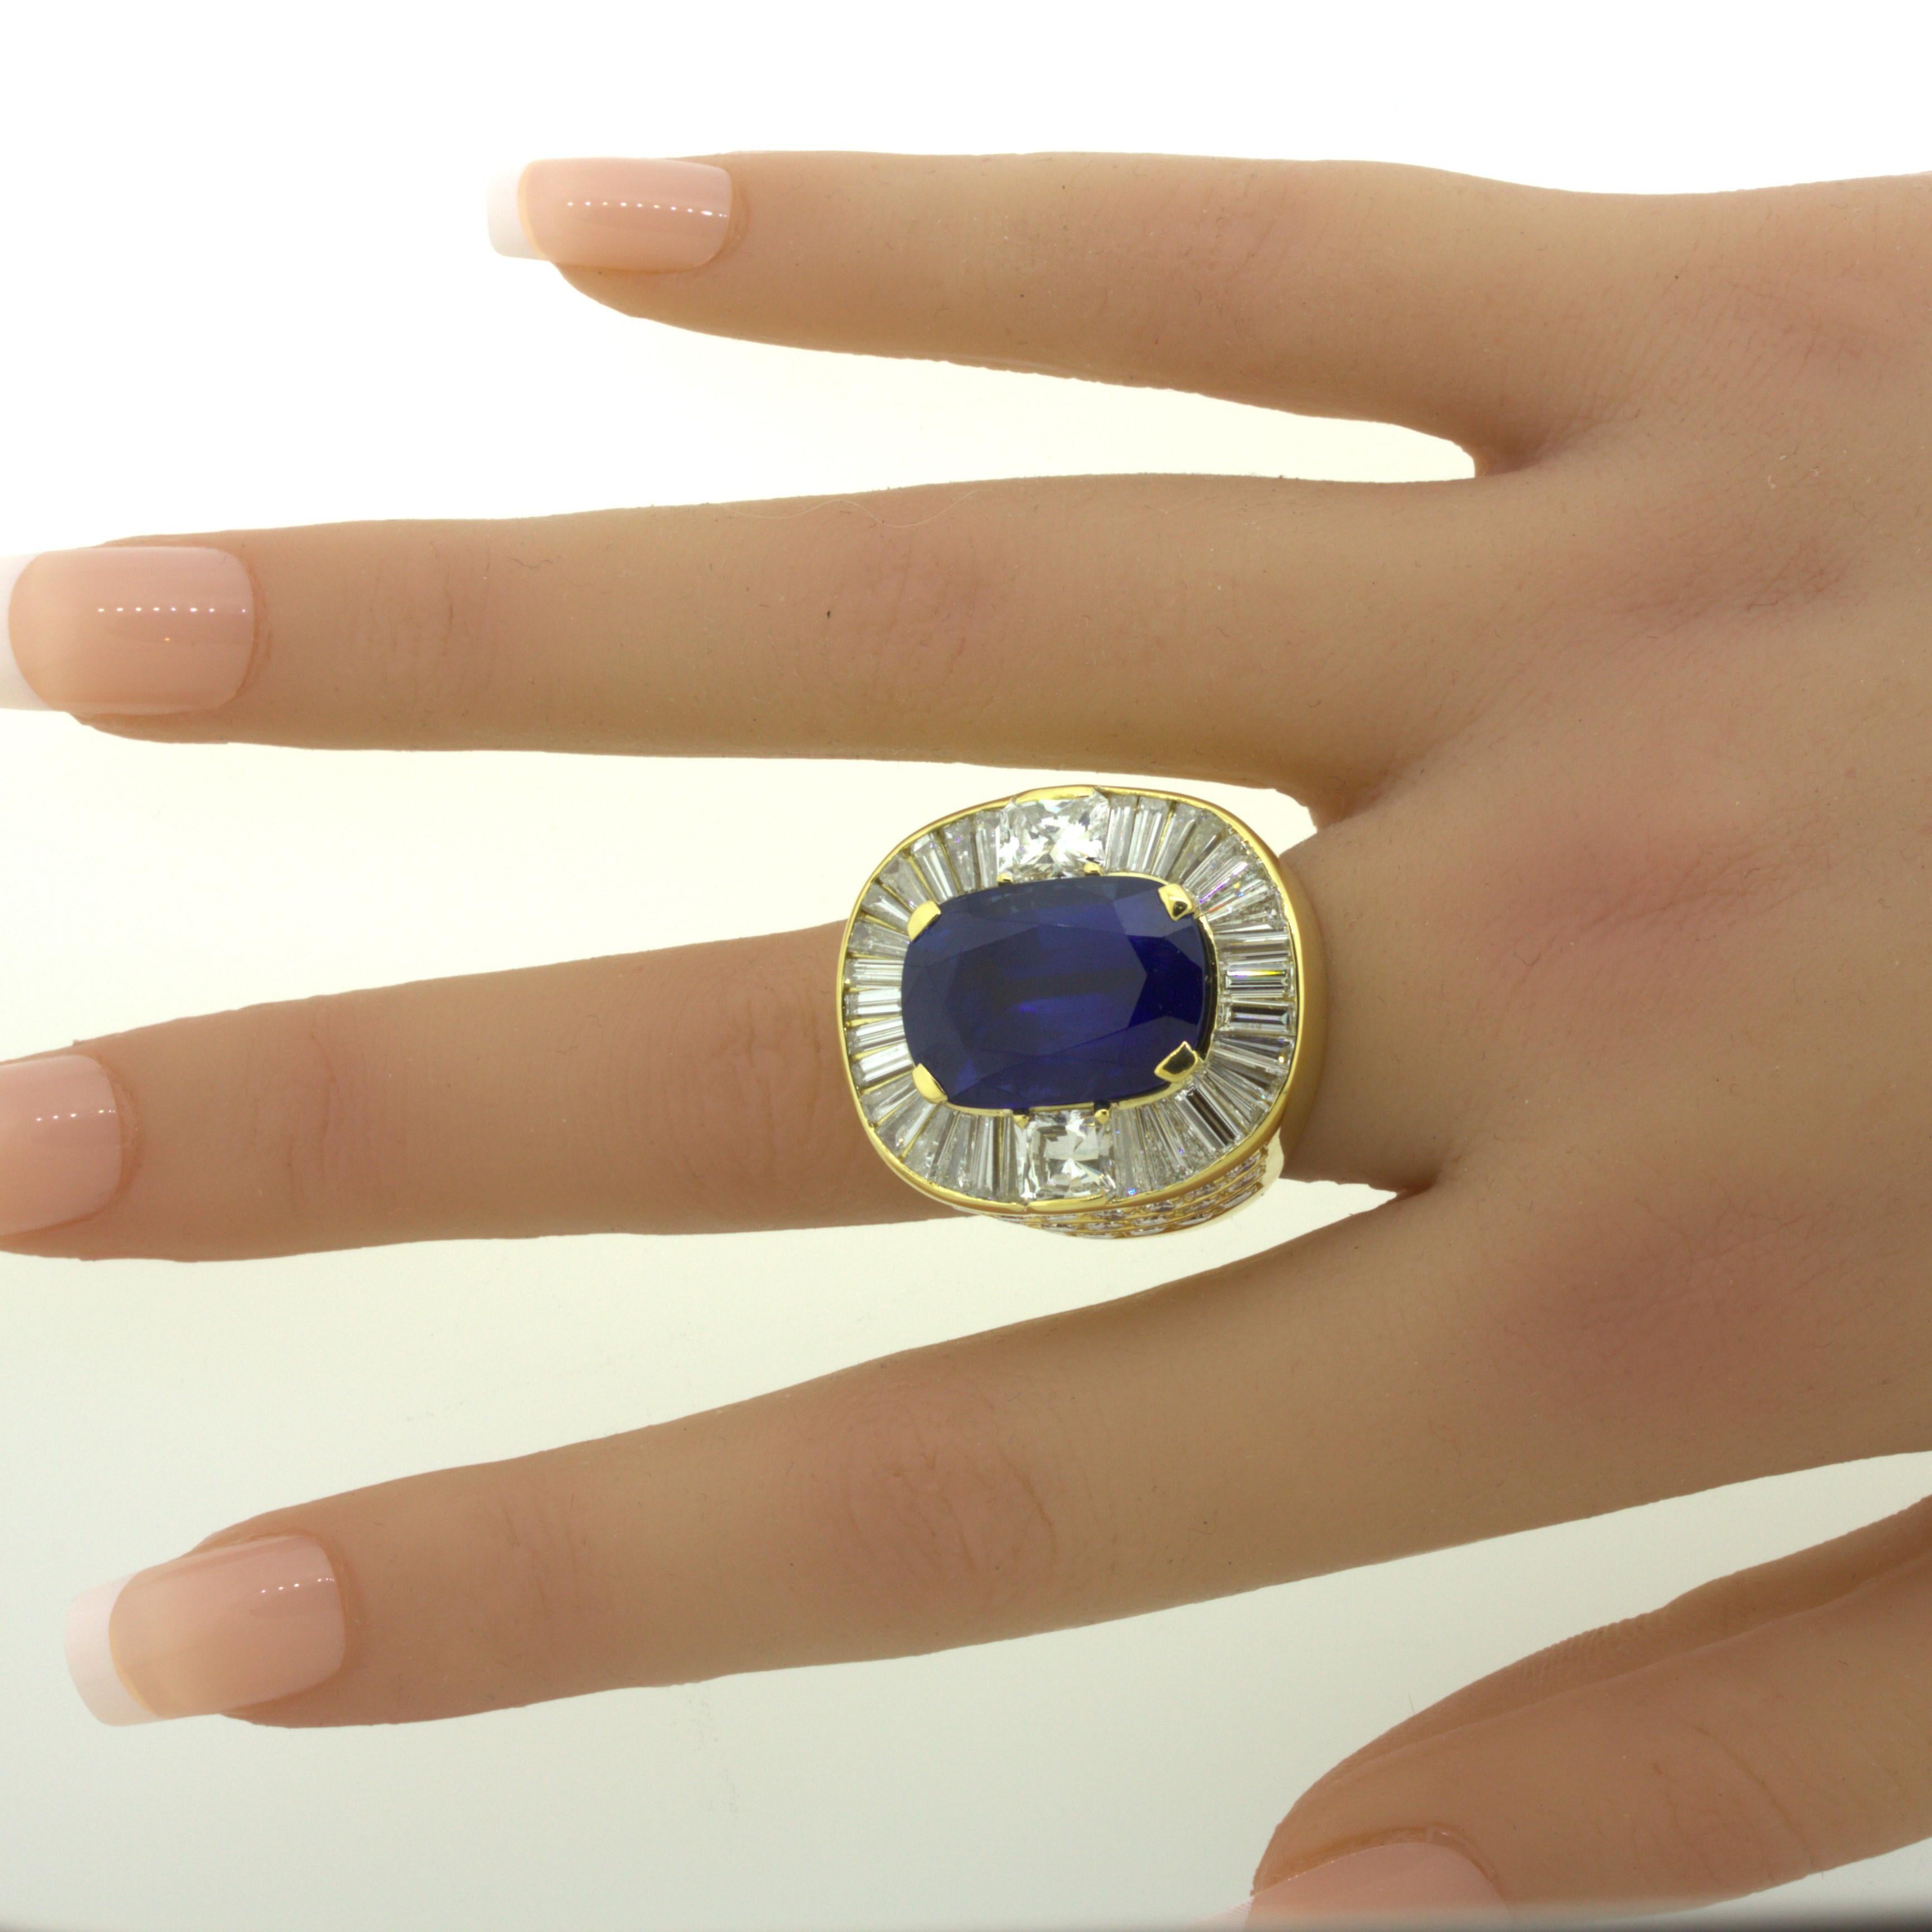 19.36 Carat Ceylon Sapphire Diamond 18K Yellow Gold Cocktail Ring, GIA Certified For Sale 7